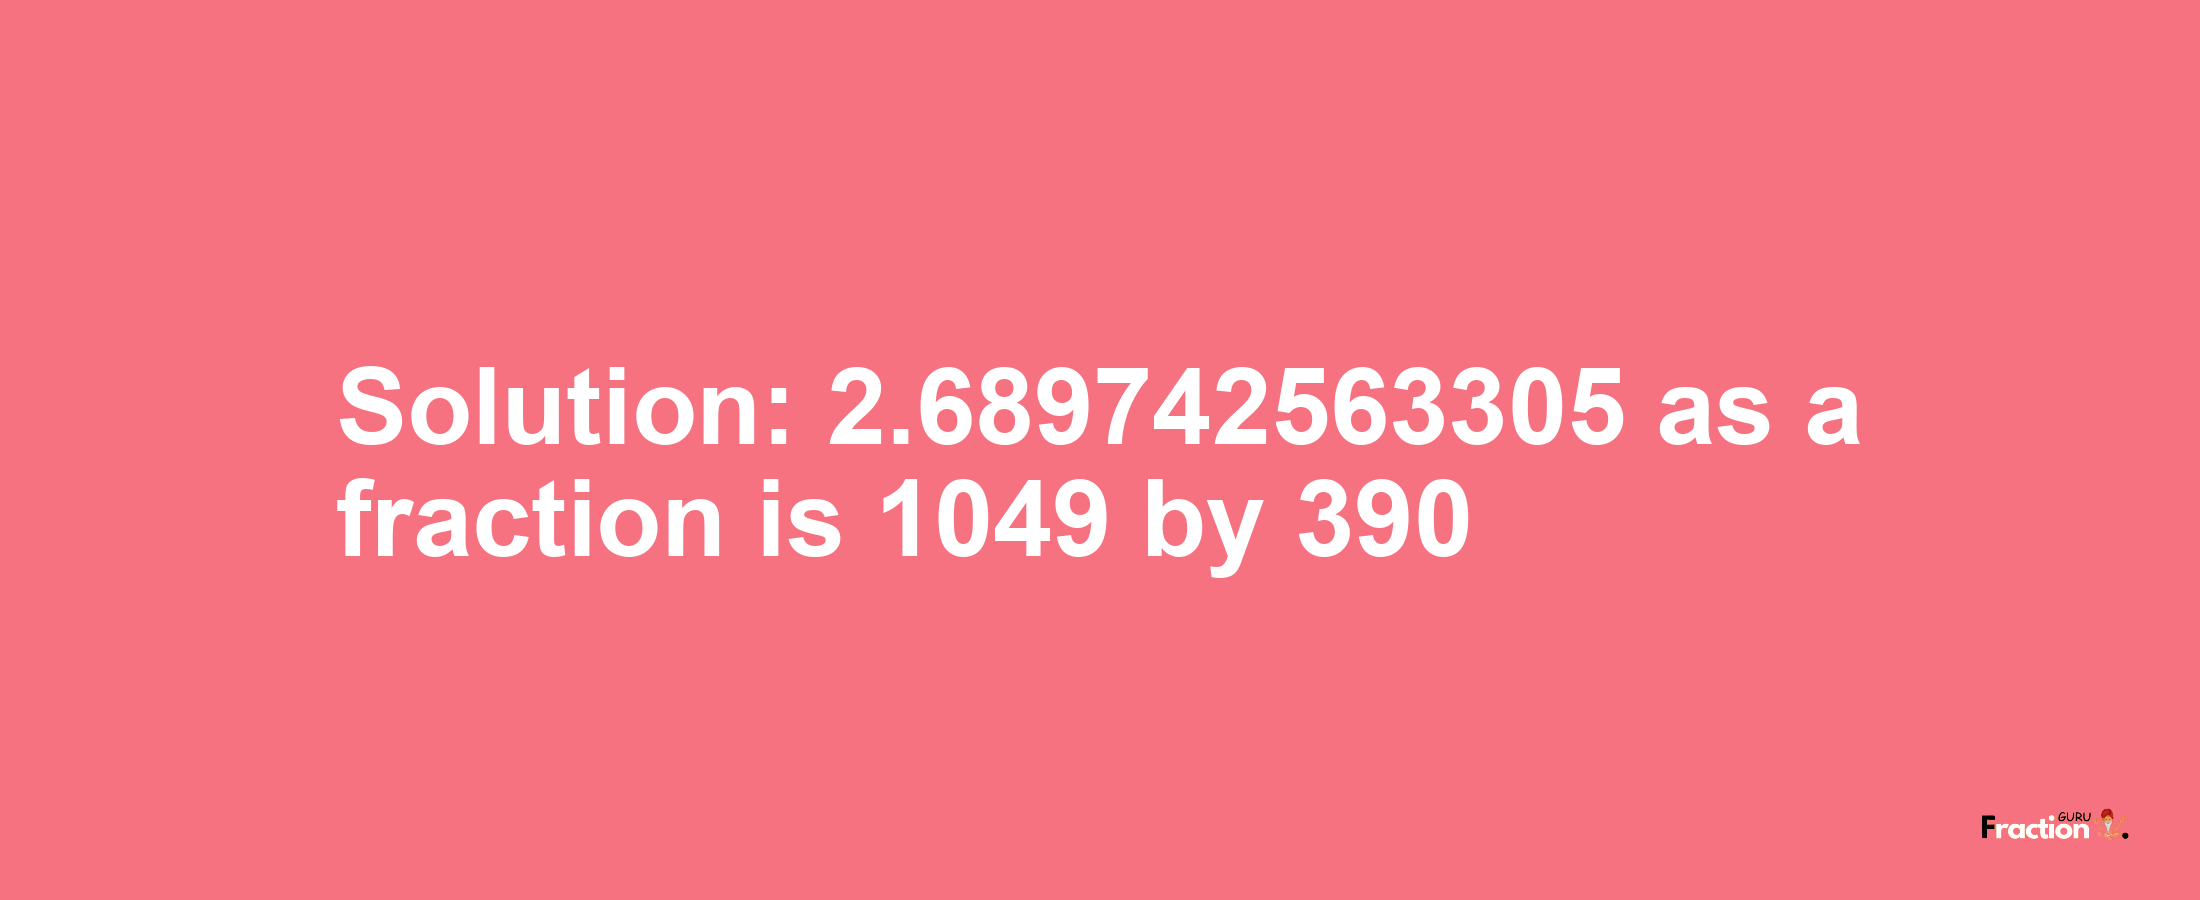 Solution:2.689742563305 as a fraction is 1049/390